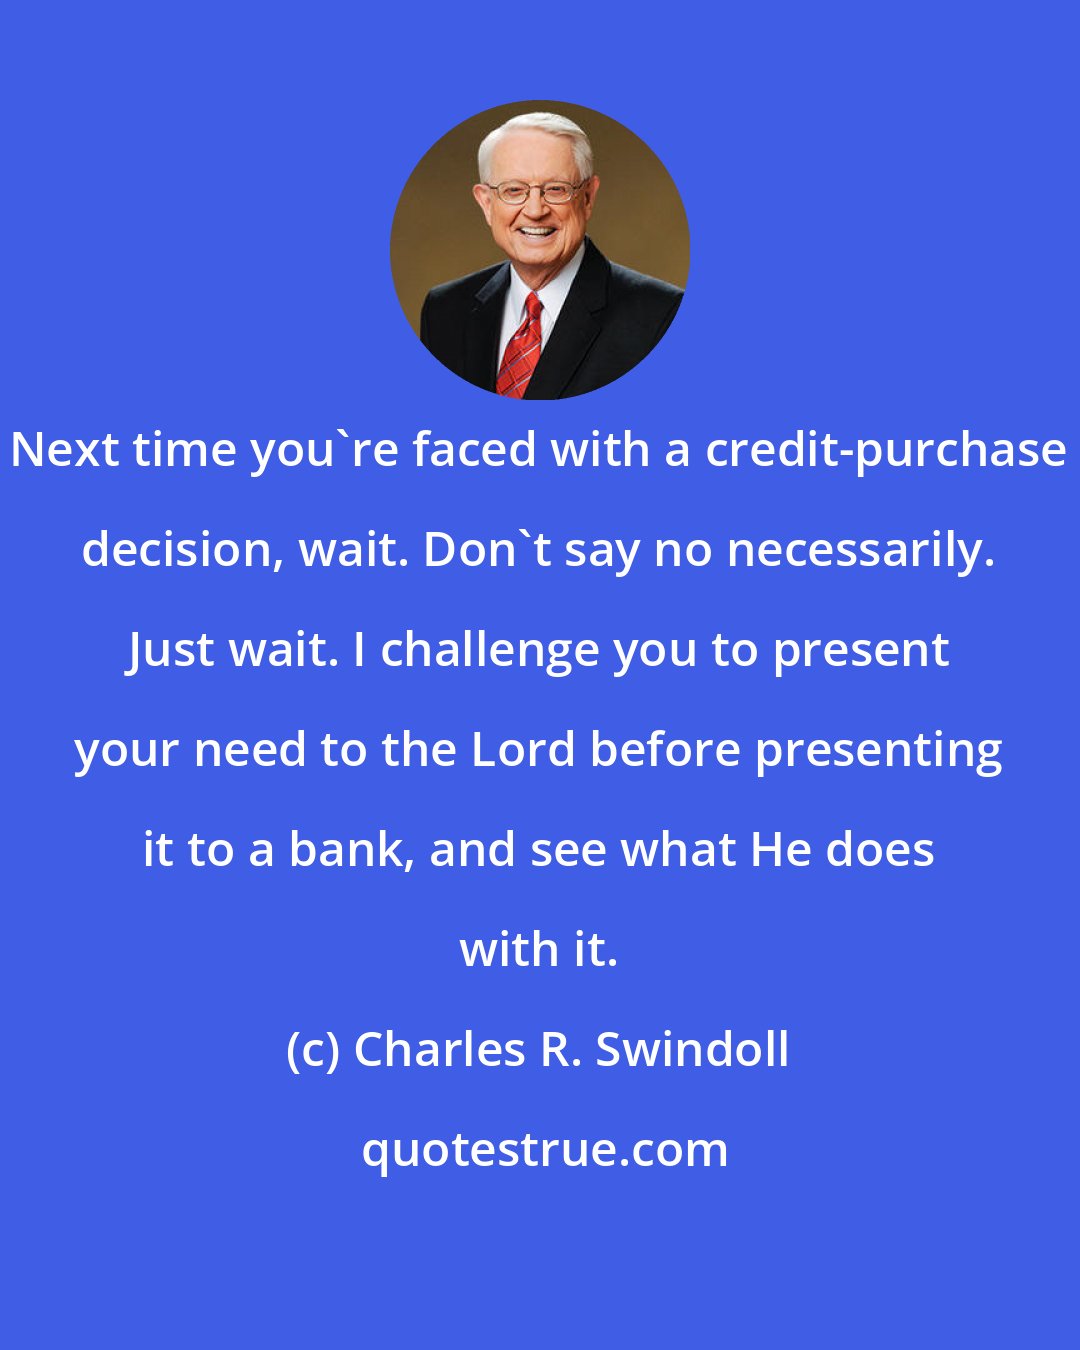 Charles R. Swindoll: Next time you're faced with a credit-purchase decision, wait. Don't say no necessarily. Just wait. I challenge you to present your need to the Lord before presenting it to a bank, and see what He does with it.